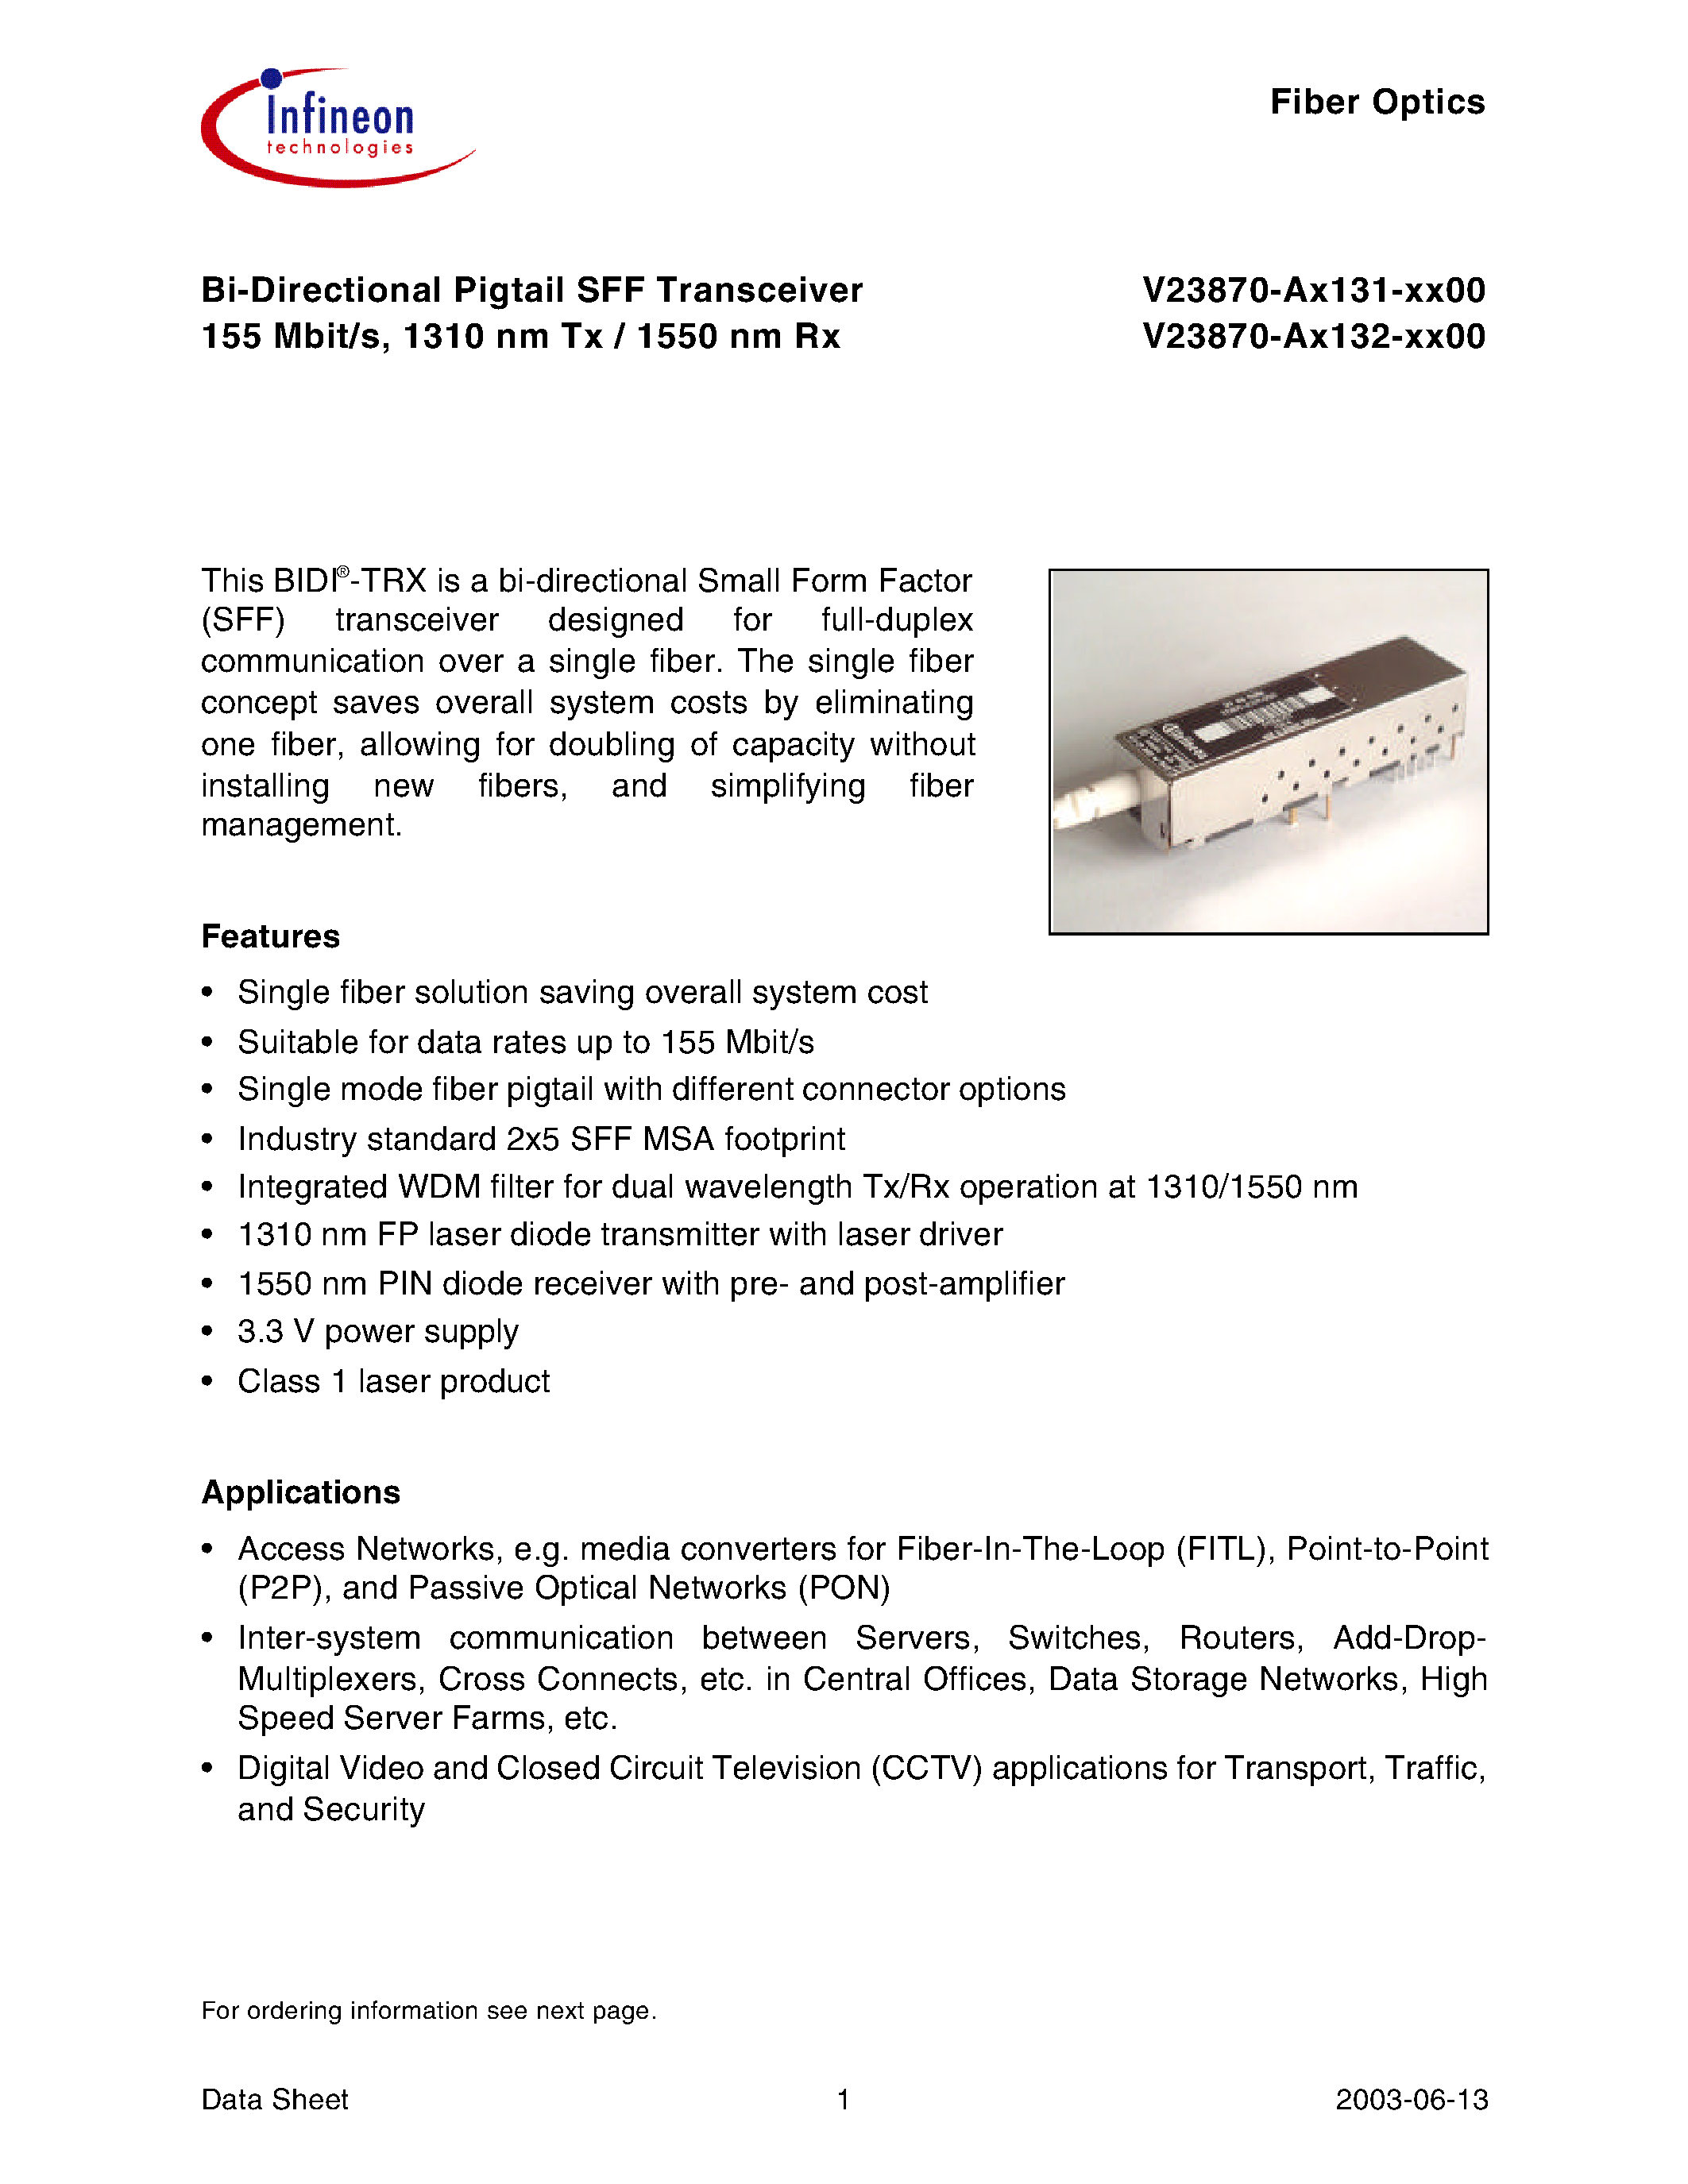 Datasheet V23870-A3132-C600 - Bi-Directional Pigtail SFF Transceiver 155 Mbit/s/ 1310 nm Tx / 1550 nm Rx page 1